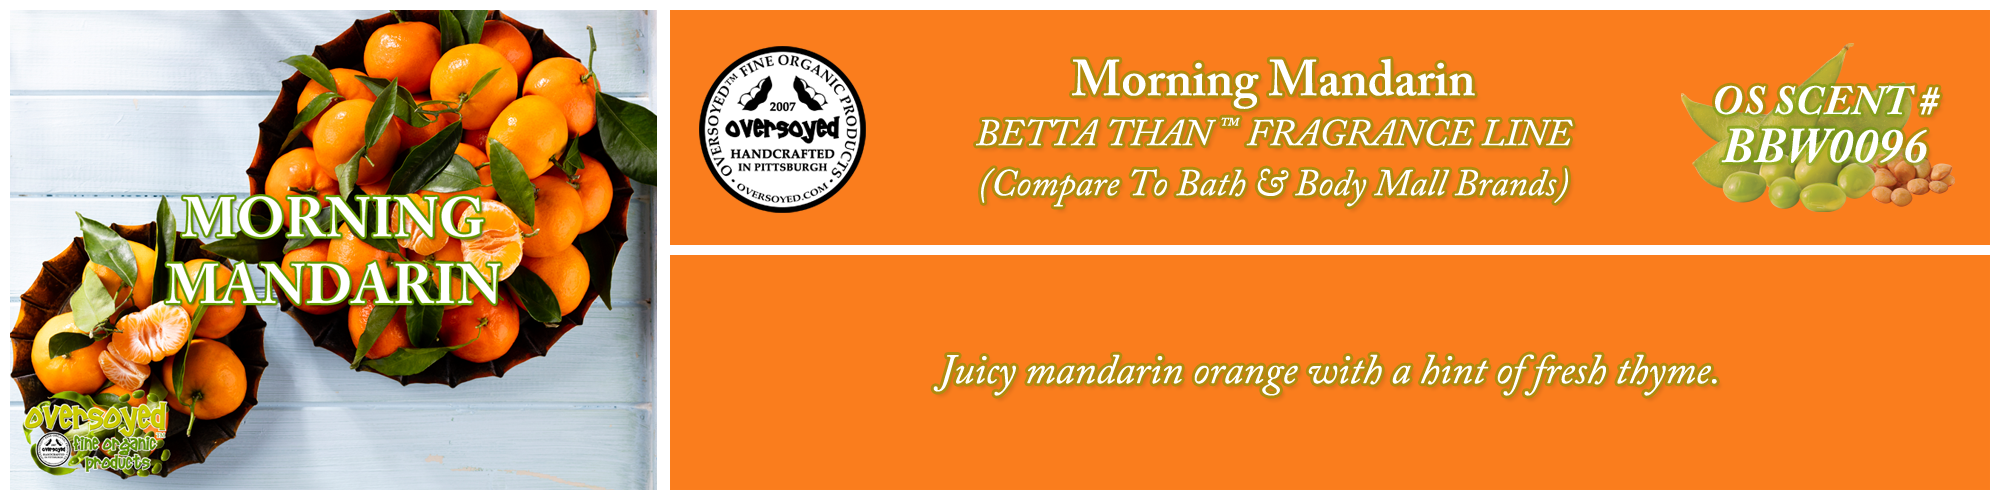 Morning Mandarin Handcrafted Products Collection